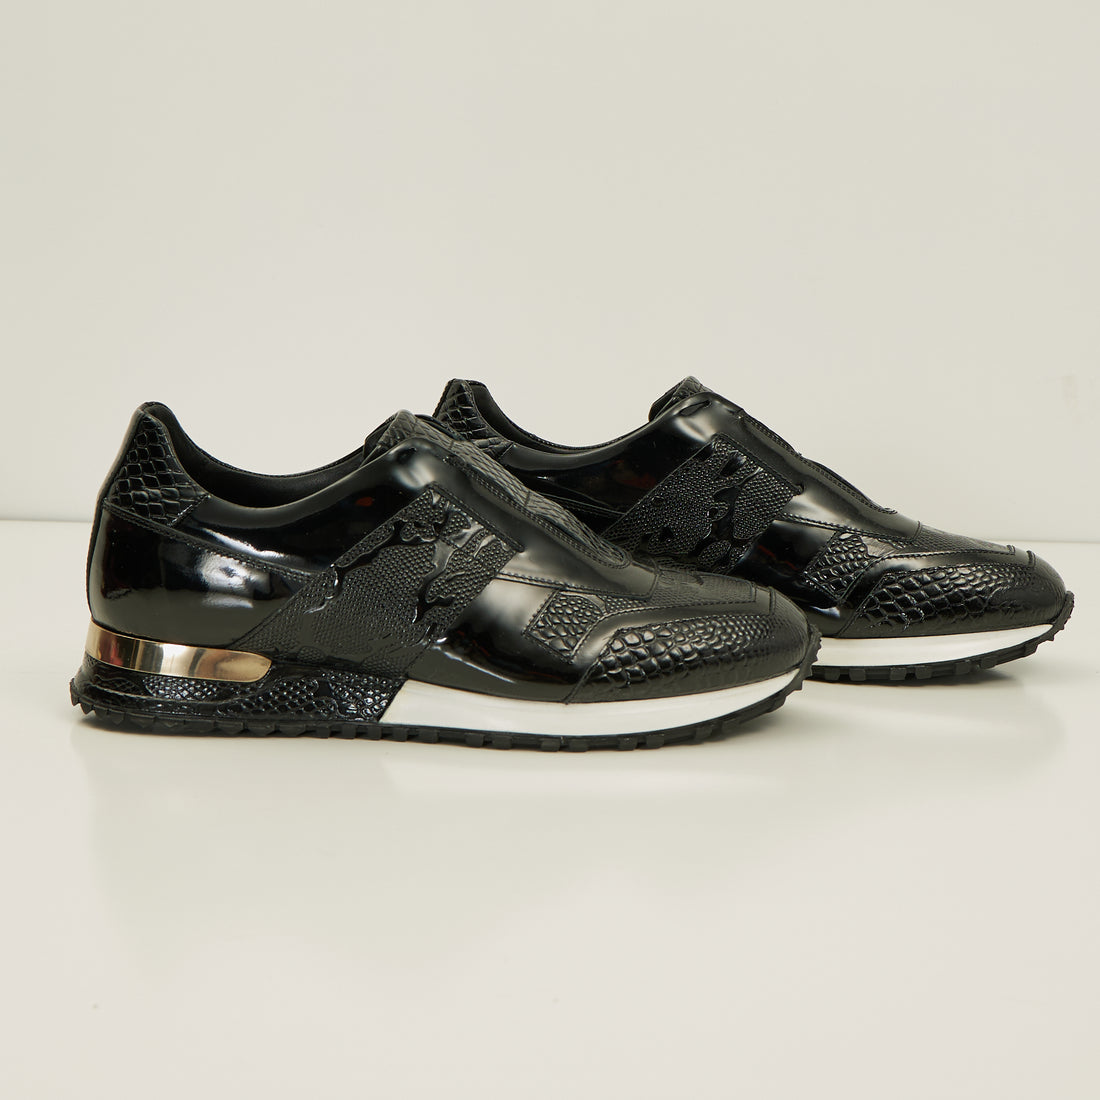 Louis Vuitton Executive Shoes in Adabraka - Shoes, Stone Unisex Collections